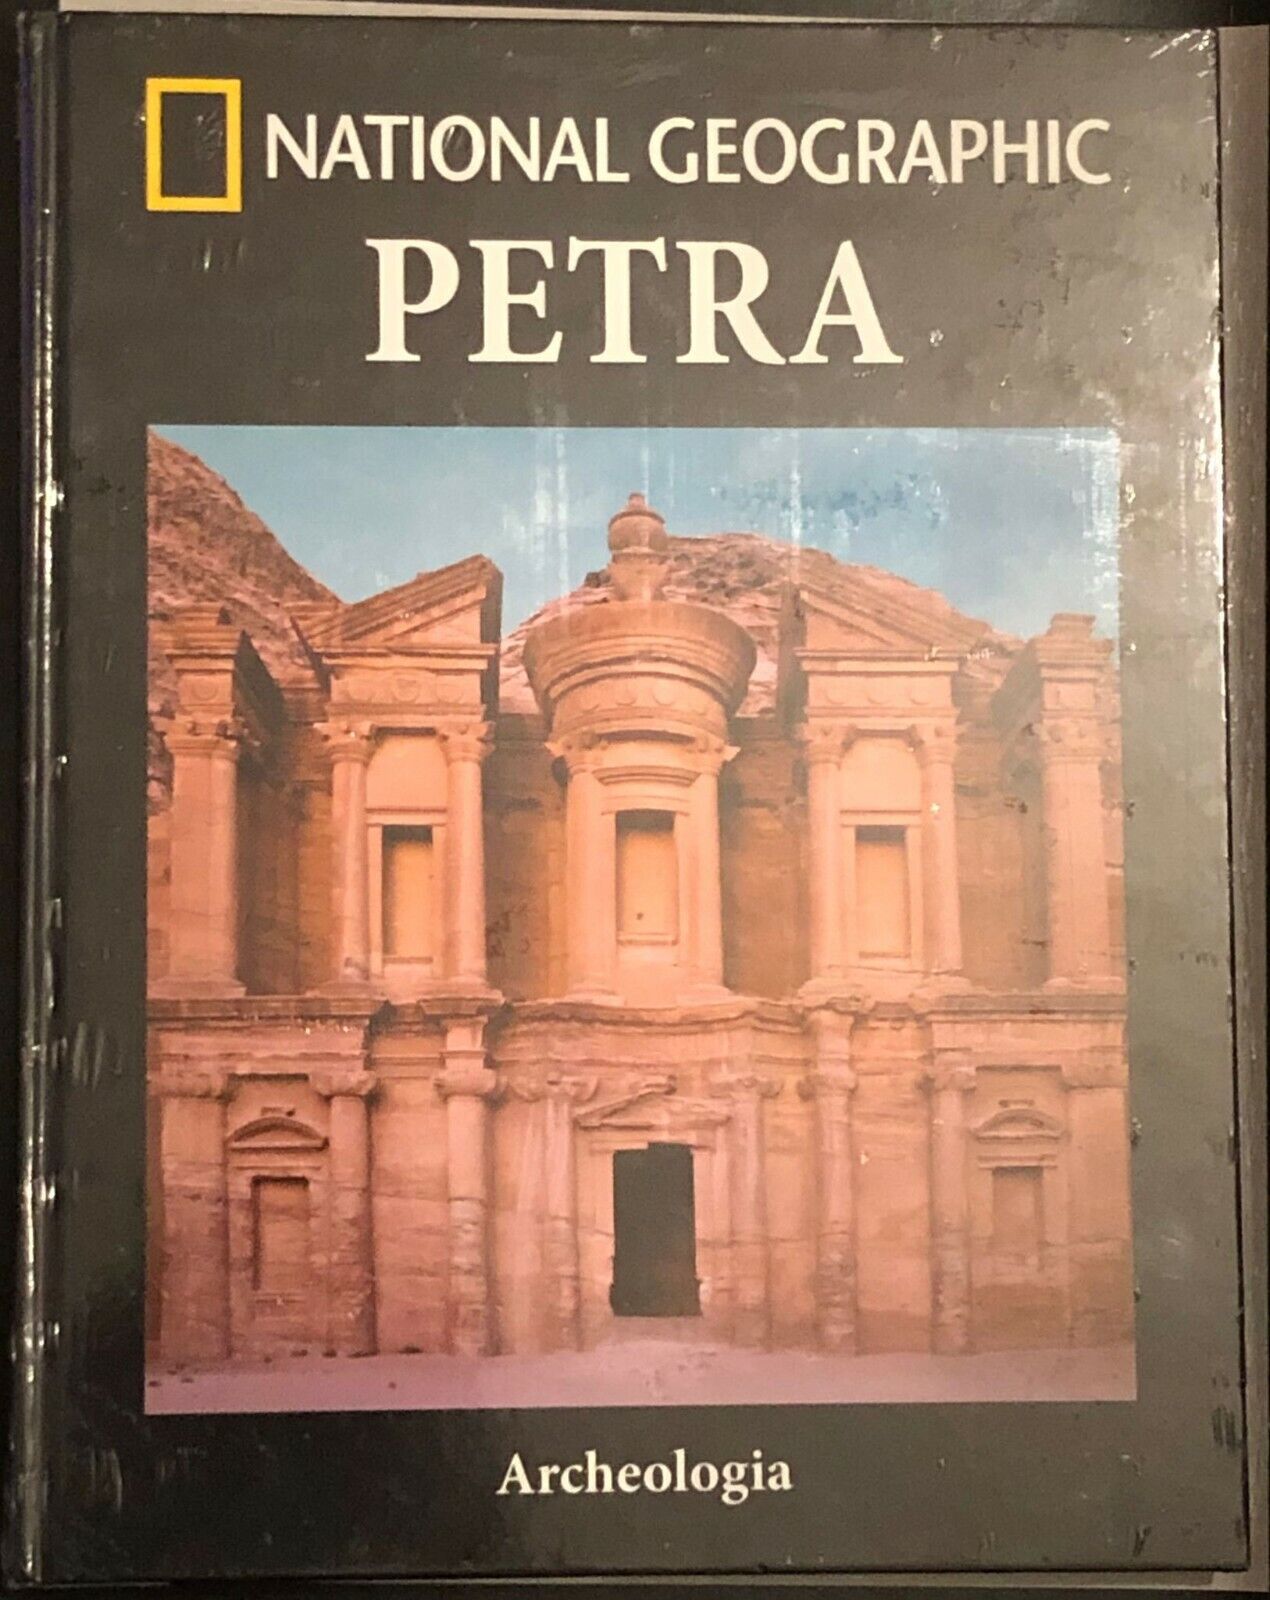 National Geographic n. 1 Petra di National Geographic,  2021,  Rba